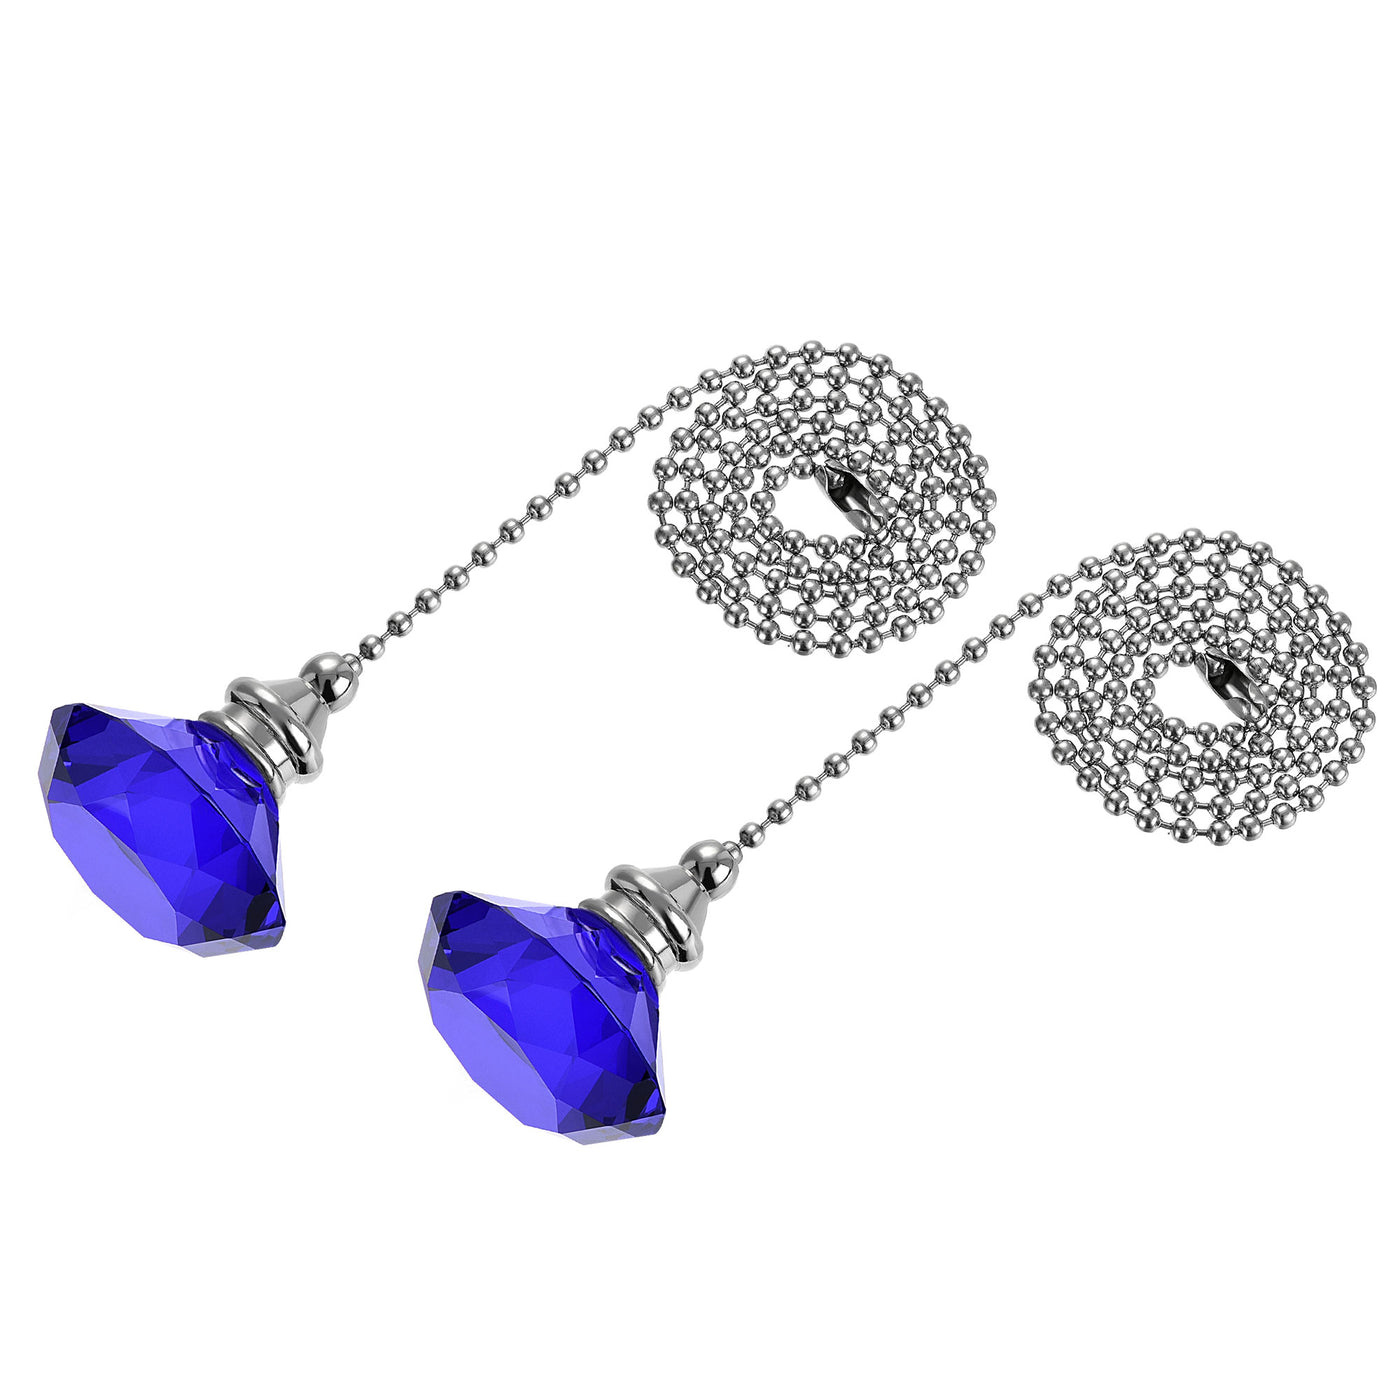 uxcell Uxcell 20 Inch Ceiling Fan Pull Chain, Decorative Crystal Fan Pull Chain Ornament Extension, 3mm Diameter Beaded Diamond Pendant, Blue 2Pcs